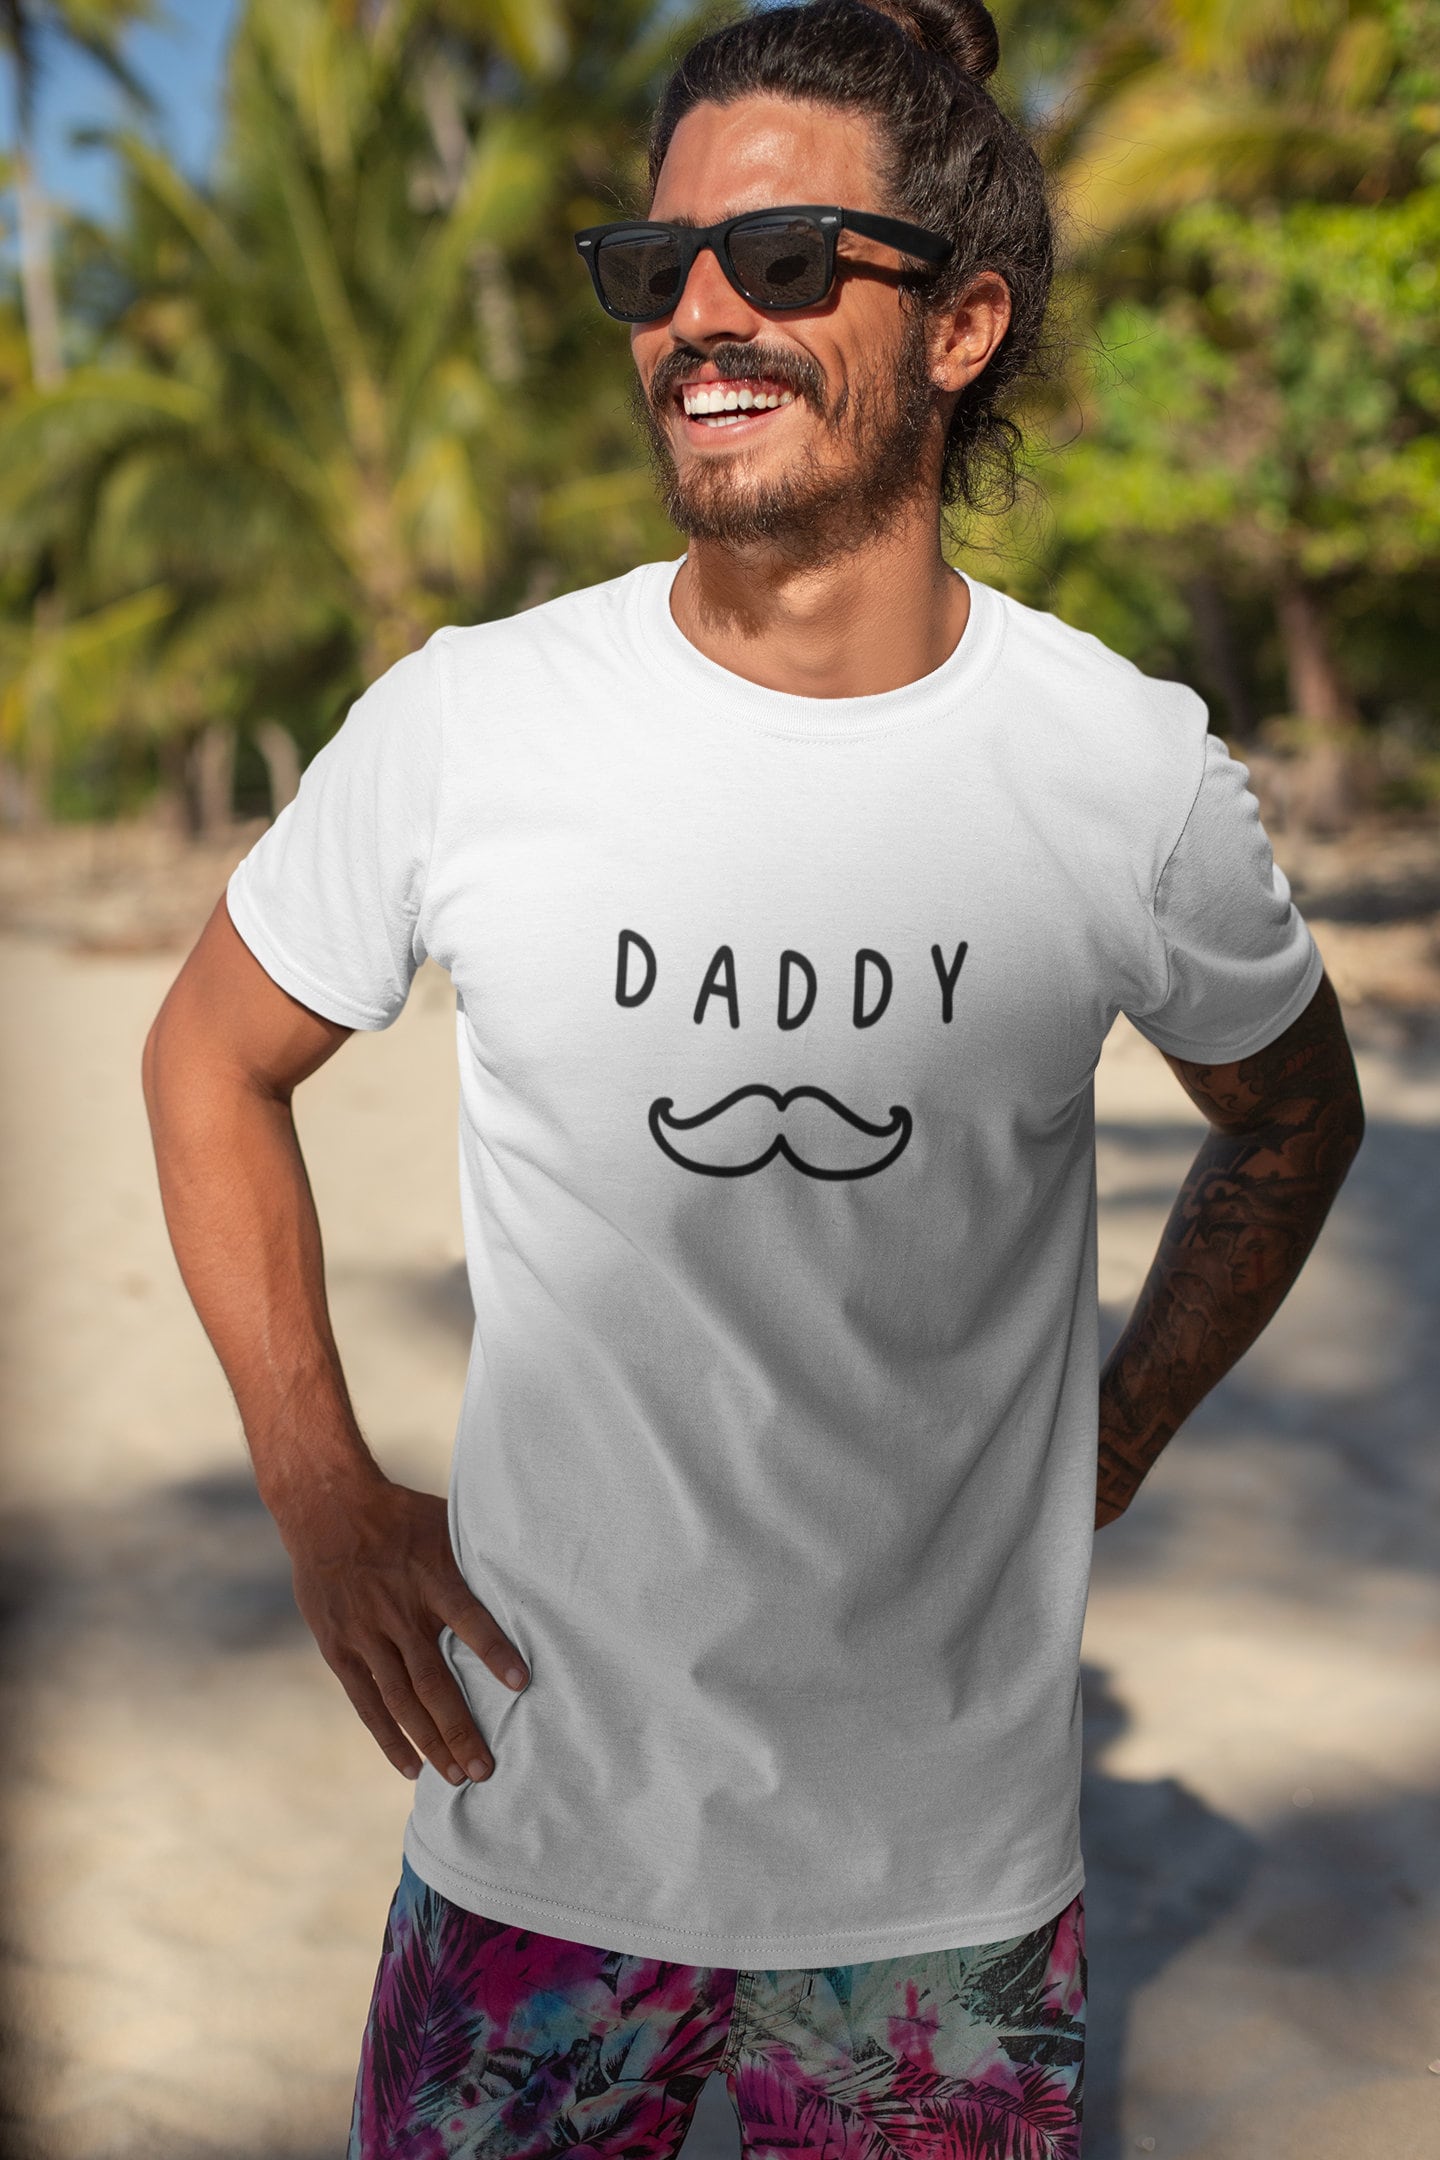 Daddy Shirt, New Daddy T-shirt, Gift for Daddy Tee, New Daddy Gift Tshirt,  Comfy Daddy Shirt, Fathers Day Gift - Etsy